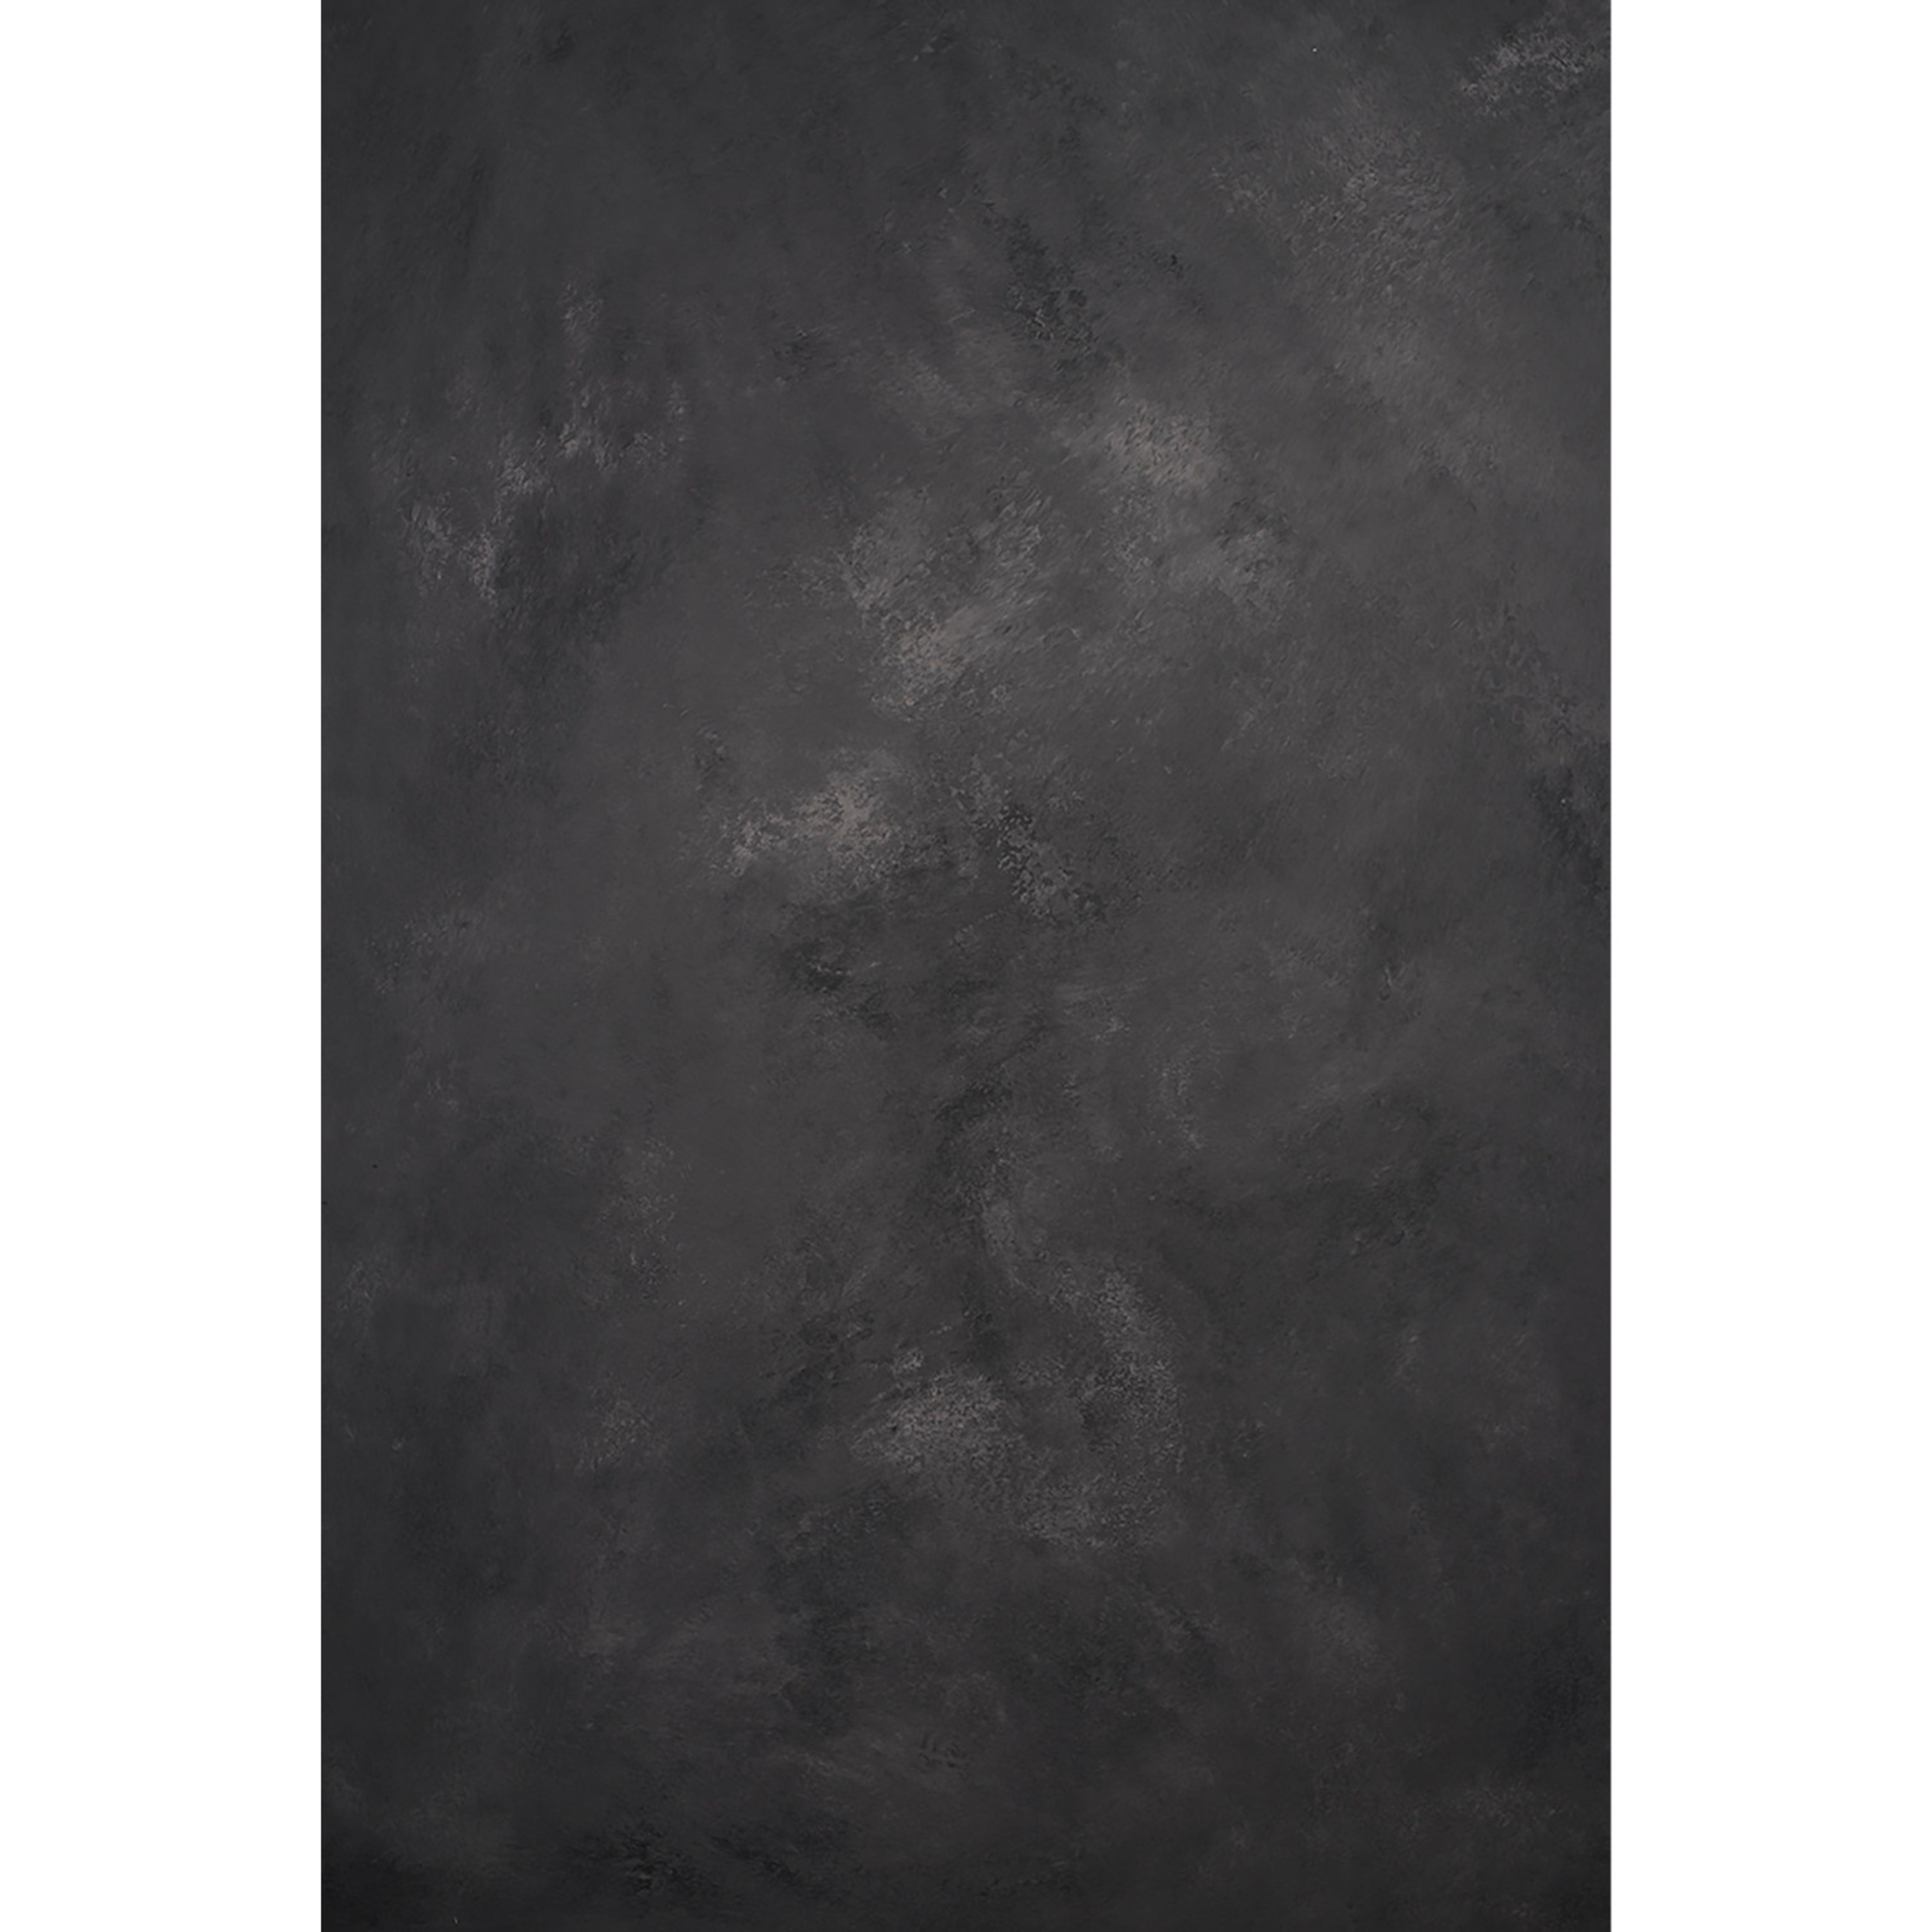 Gravity Backdrops Mid Gray Strong Texture SM (SN: 10736)